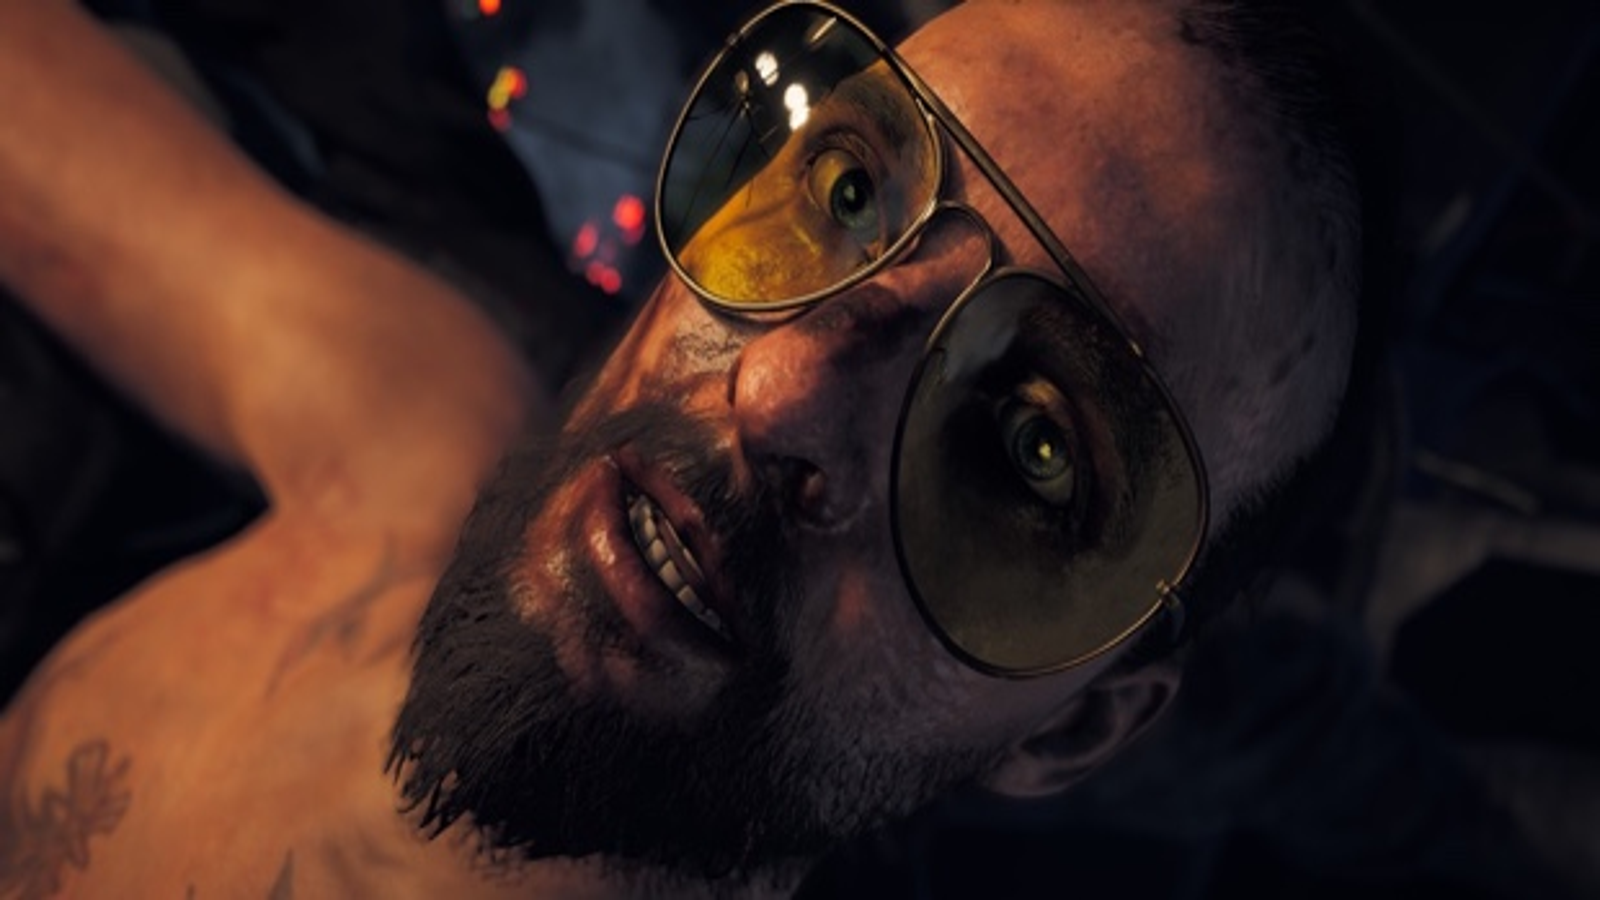 Far Cry 5 - Hours of Darkness Review - Saving Content